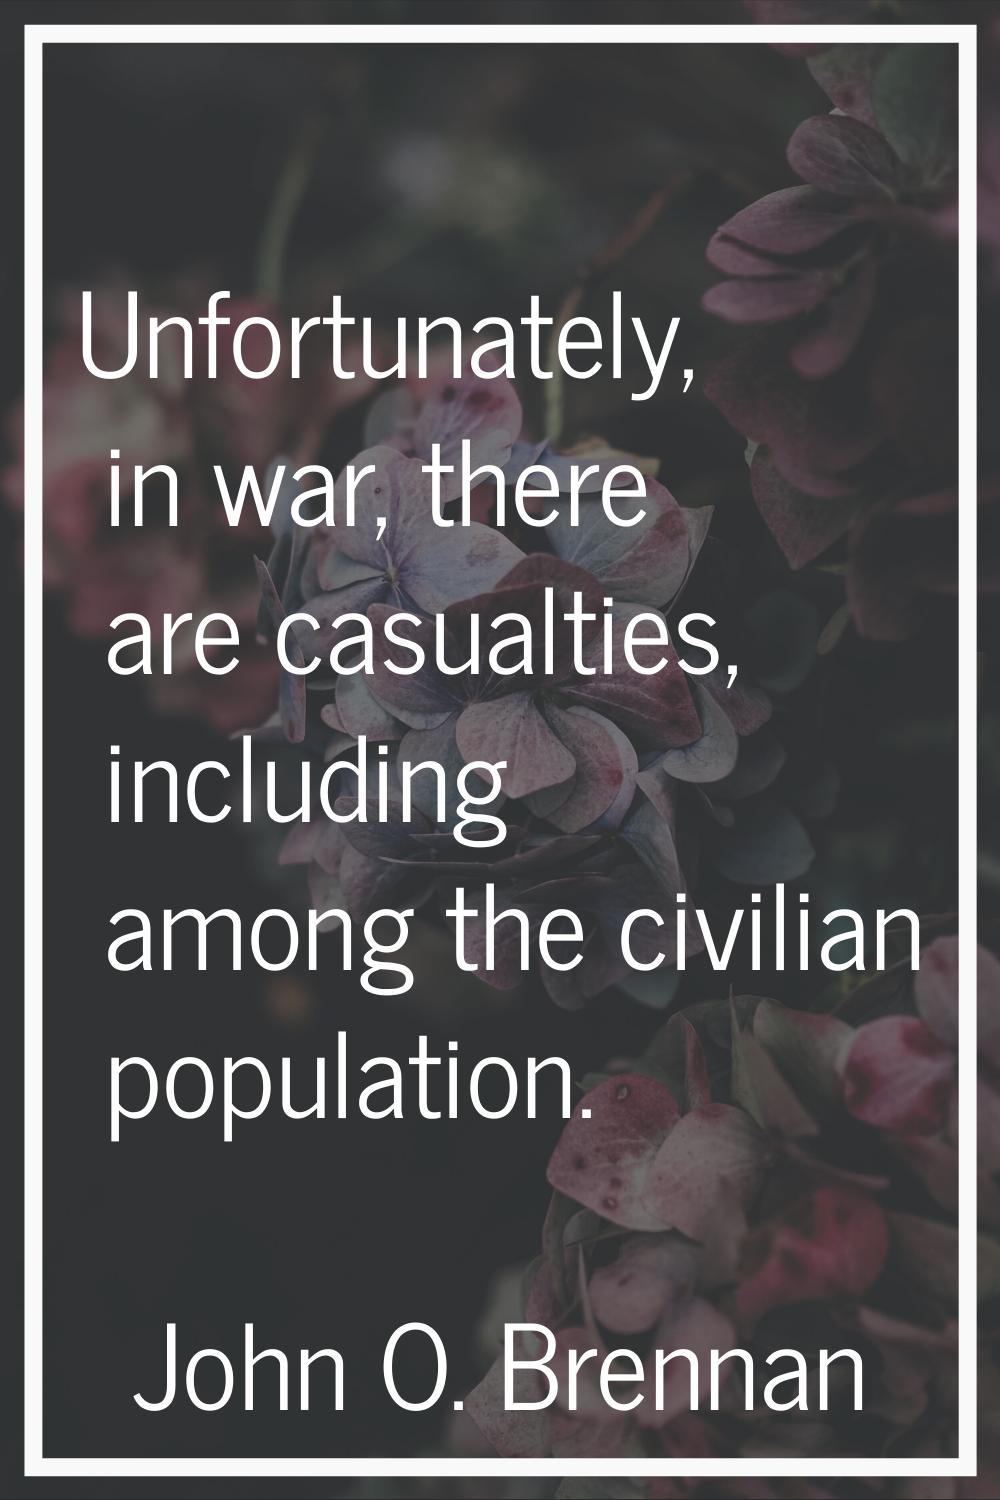 Unfortunately, in war, there are casualties, including among the civilian population.